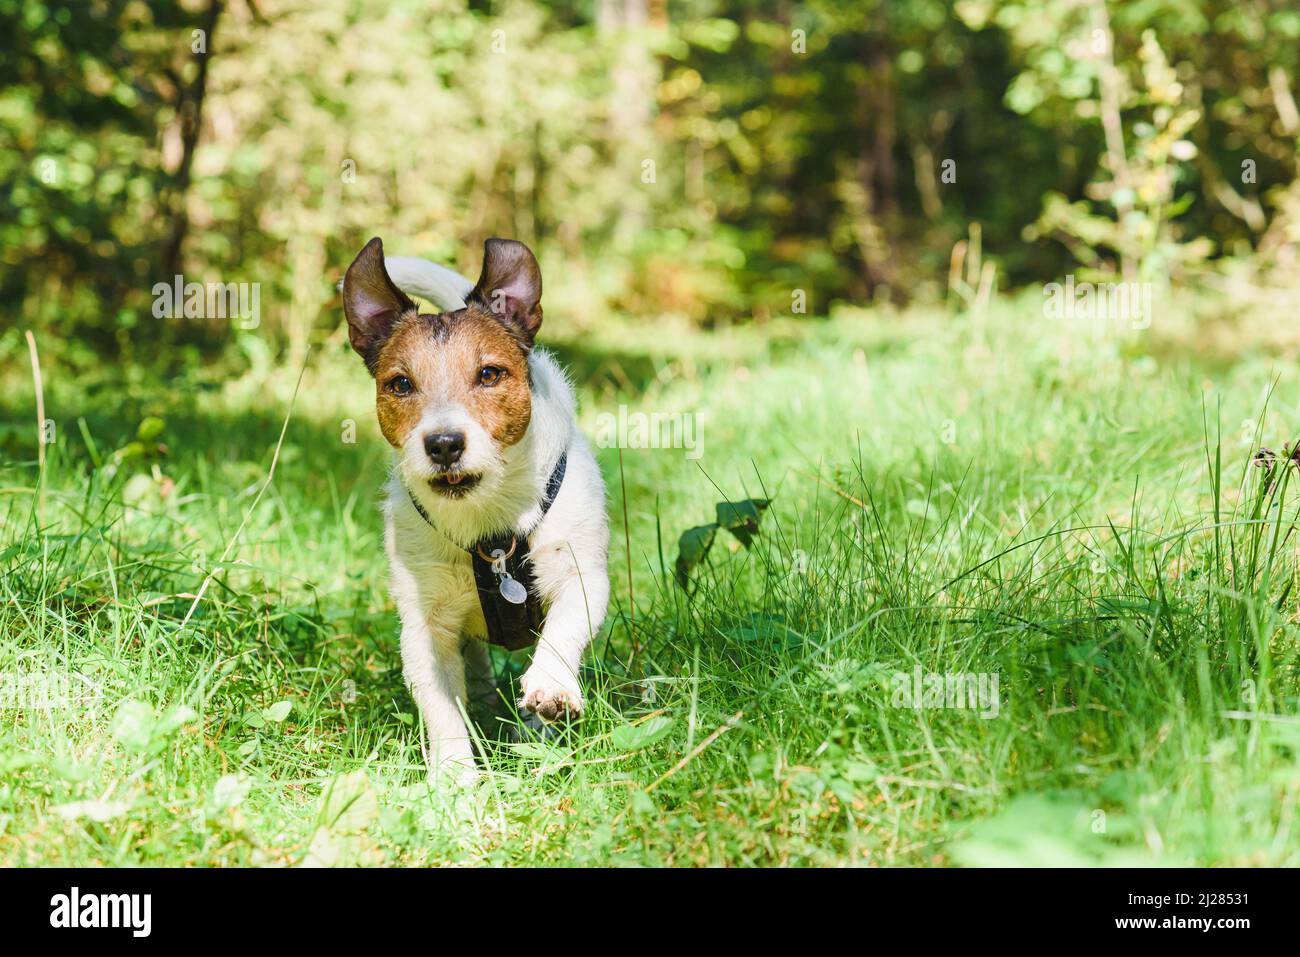 Dog running on nature trail for hikers during vacation trip in wild nature Stock Photo